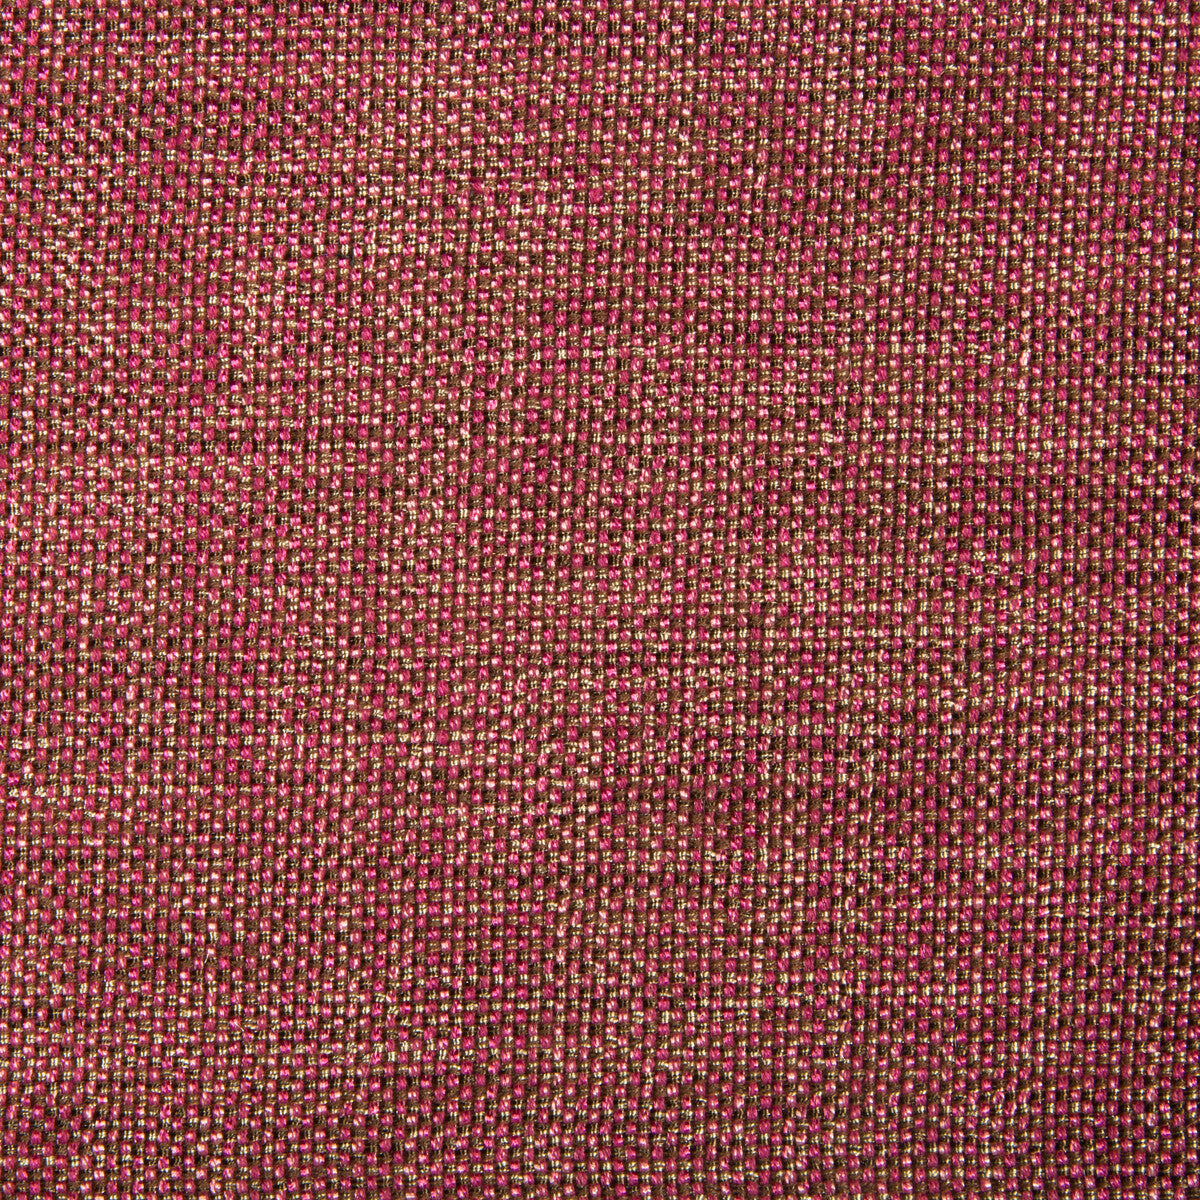 Kravet Contract fabric in 4458-617 color - pattern 4458.617.0 - by Kravet Contract